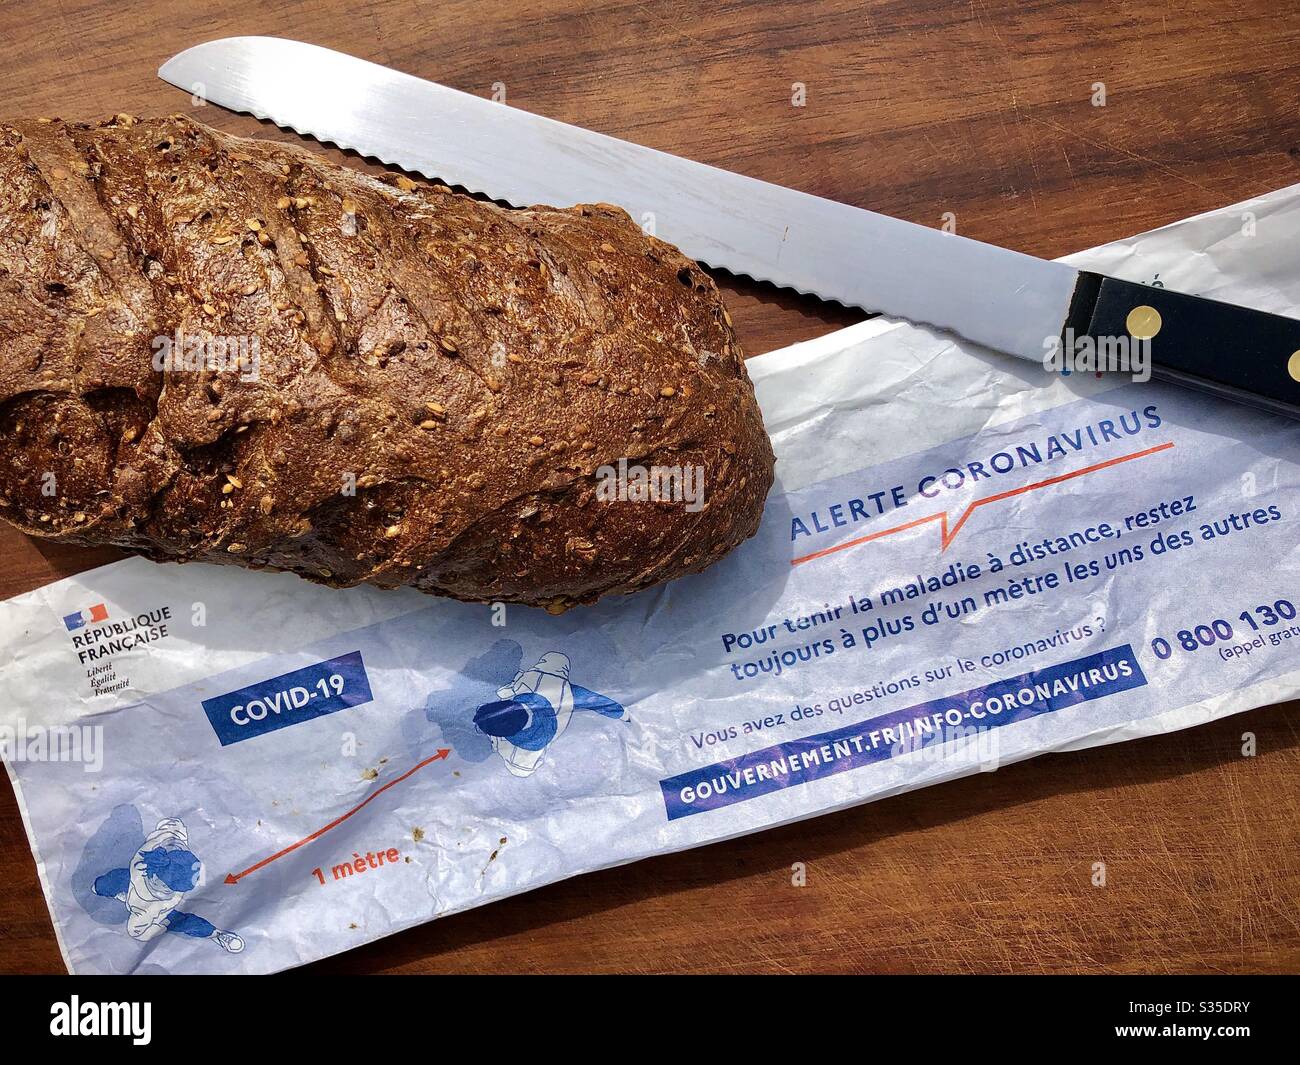 Paper bag for French bread with printed Coronavirus warning and instructions in France. Stock Photo